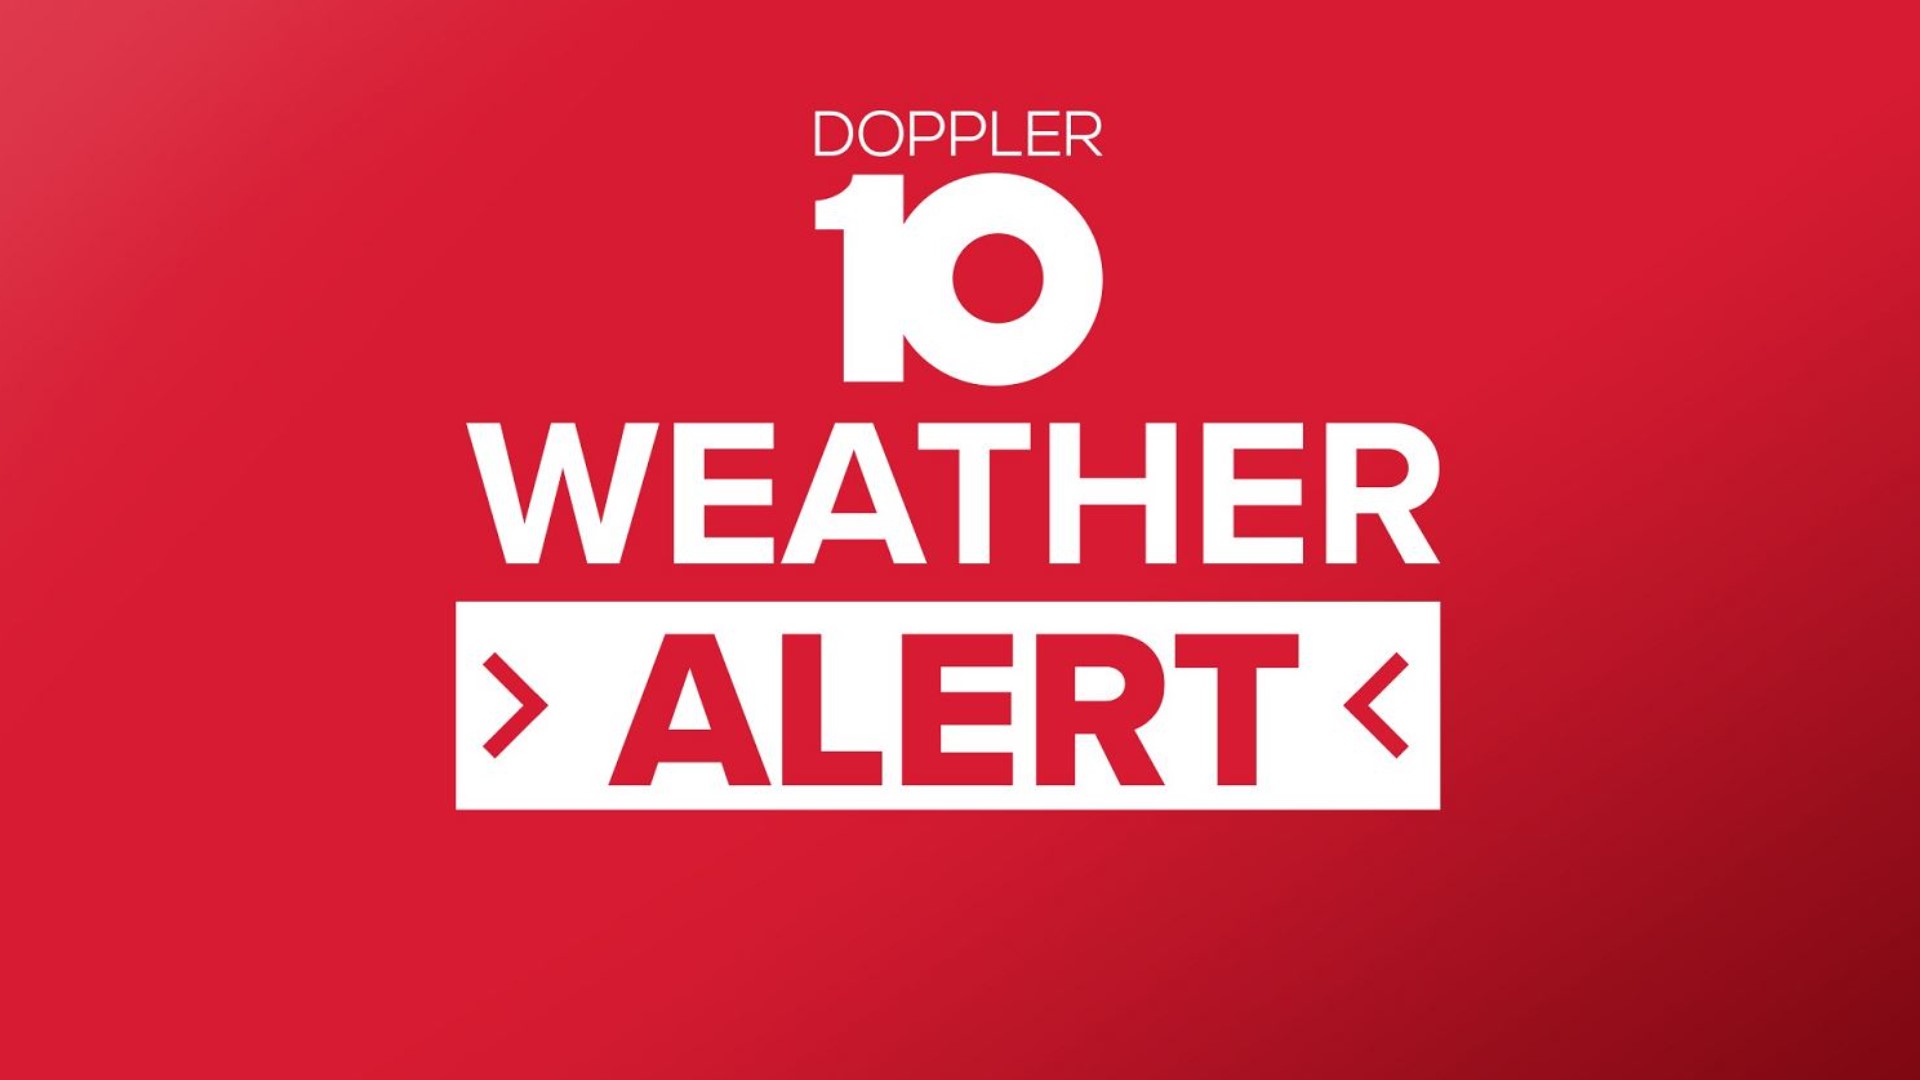 The Doppler 10 Weather team is sharing real-time, important severe weather updates.